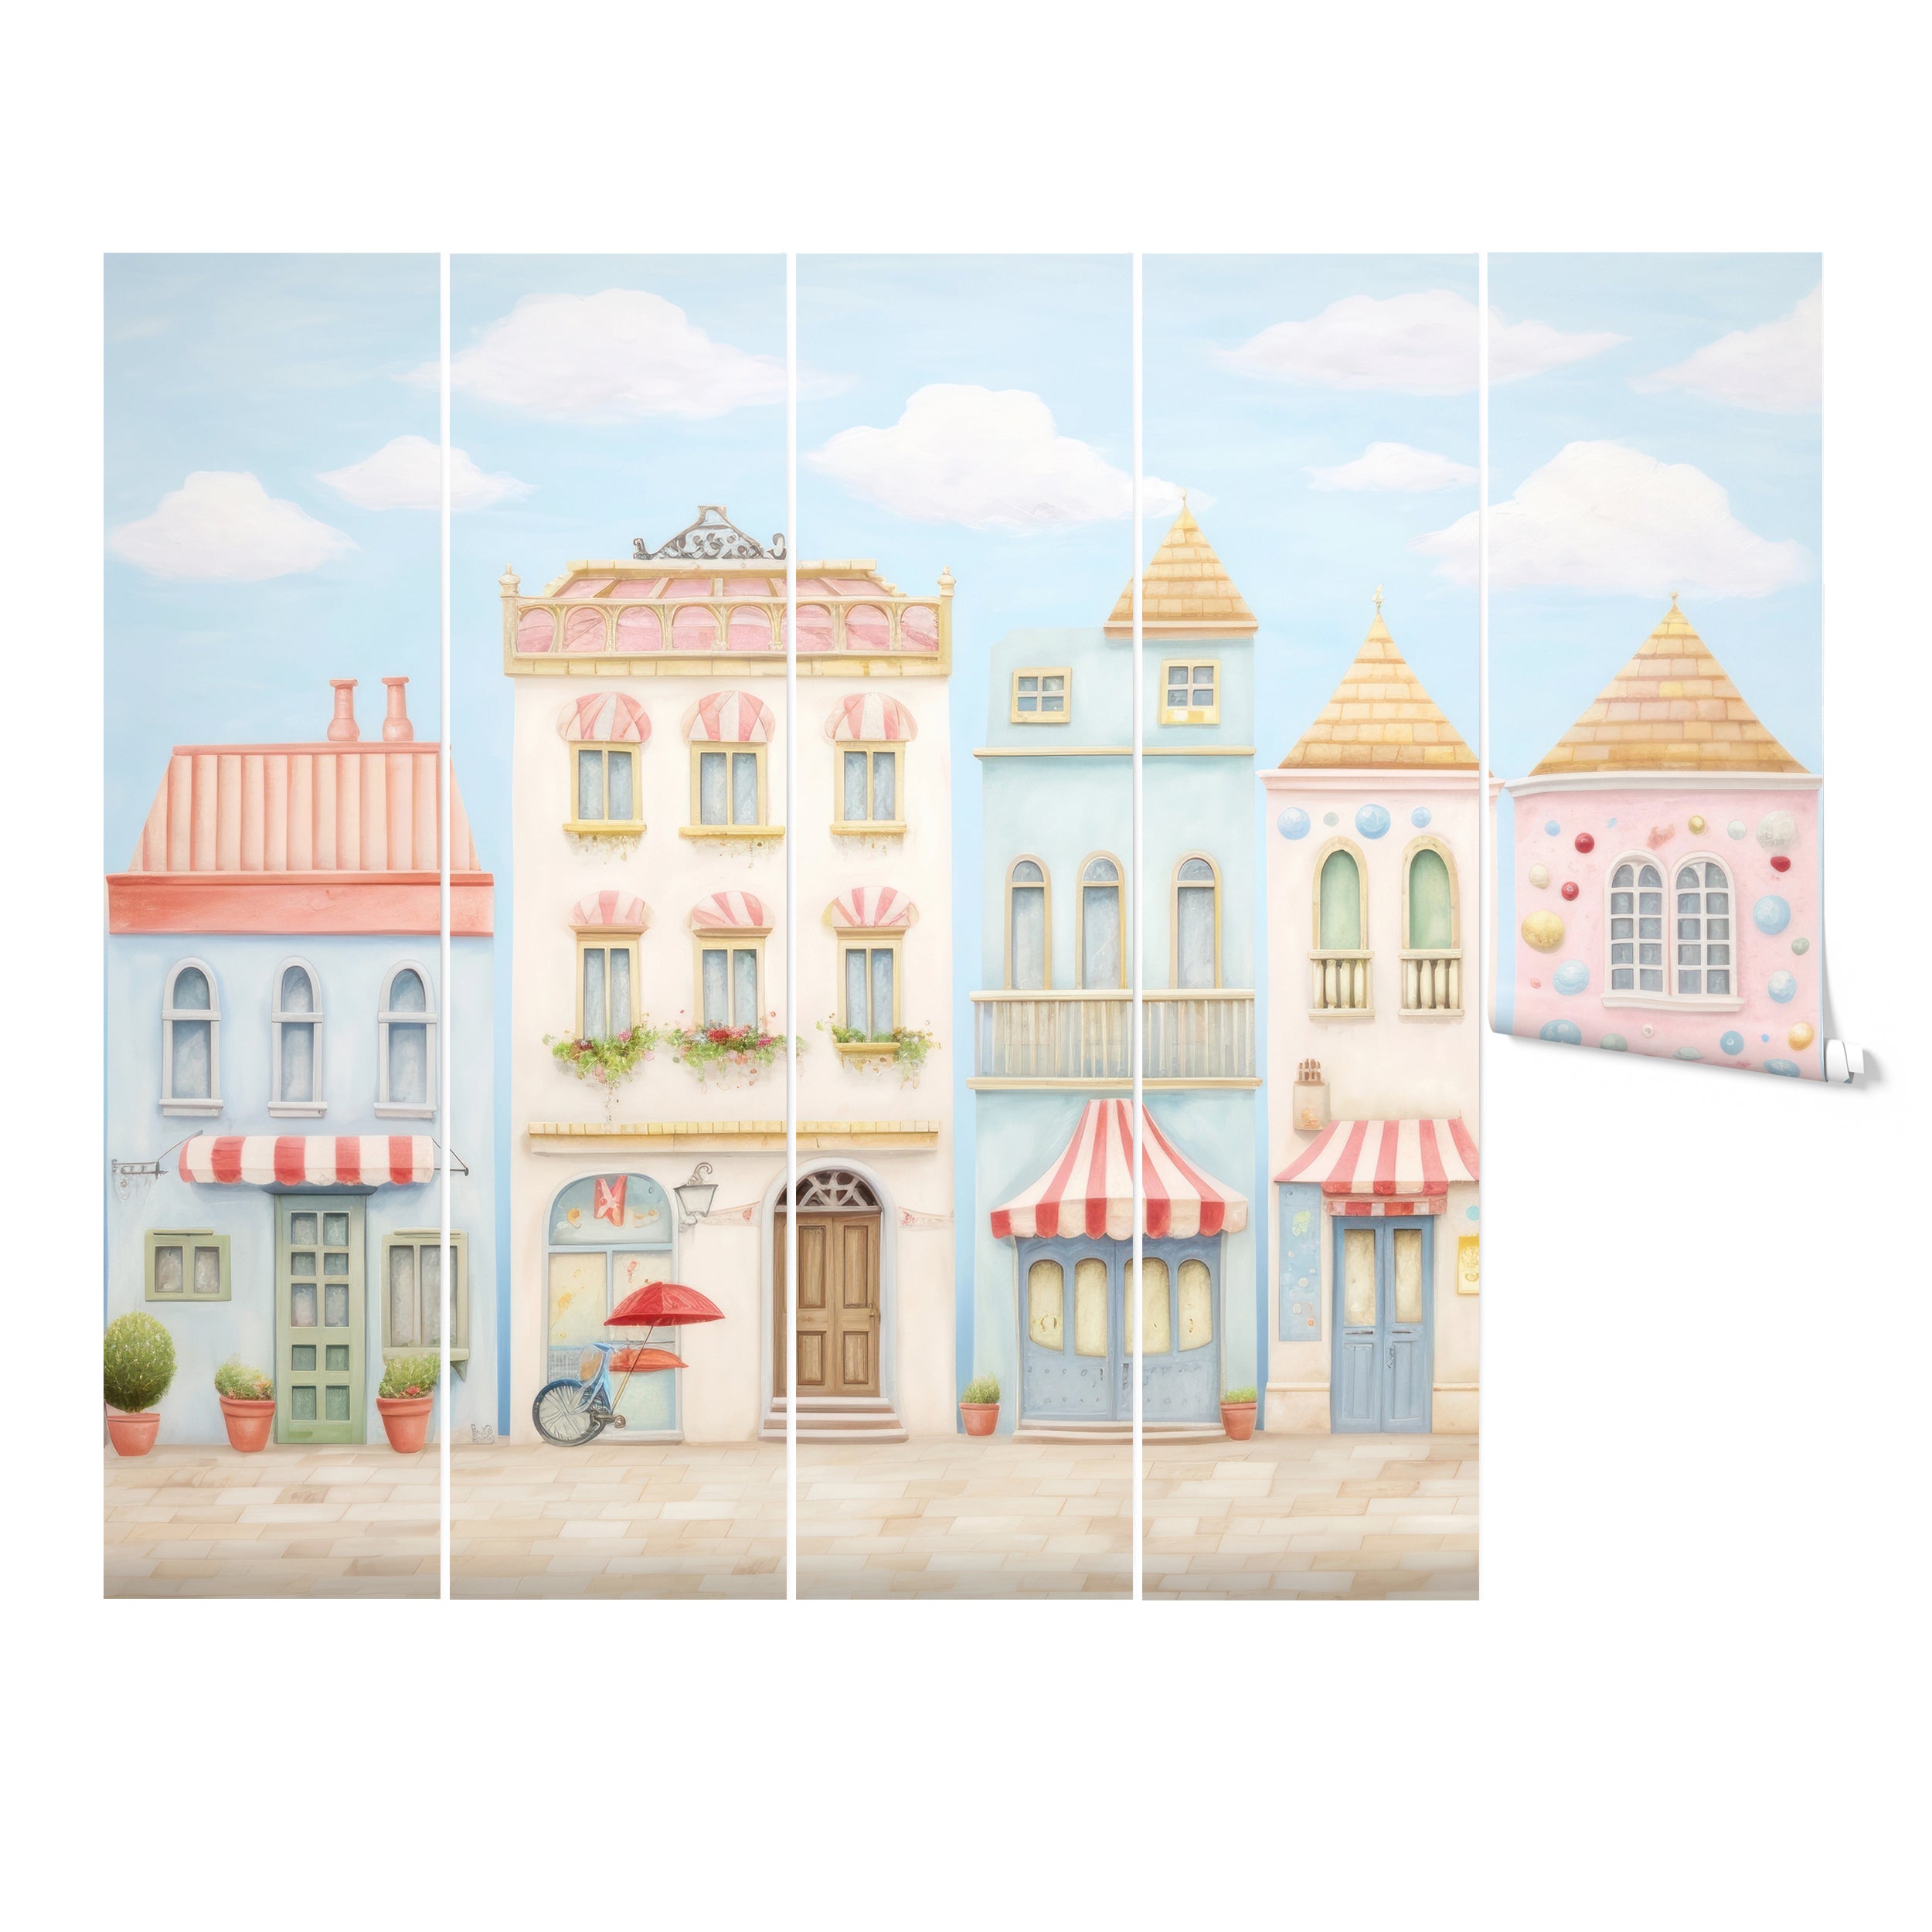 A flat lay view of the Andalusia Townhouse Wallpaper rolls. The wallpaper features a continuous design of pastel-colored townhouses with charming details, ideal for creating a whimsical and colorful environment.